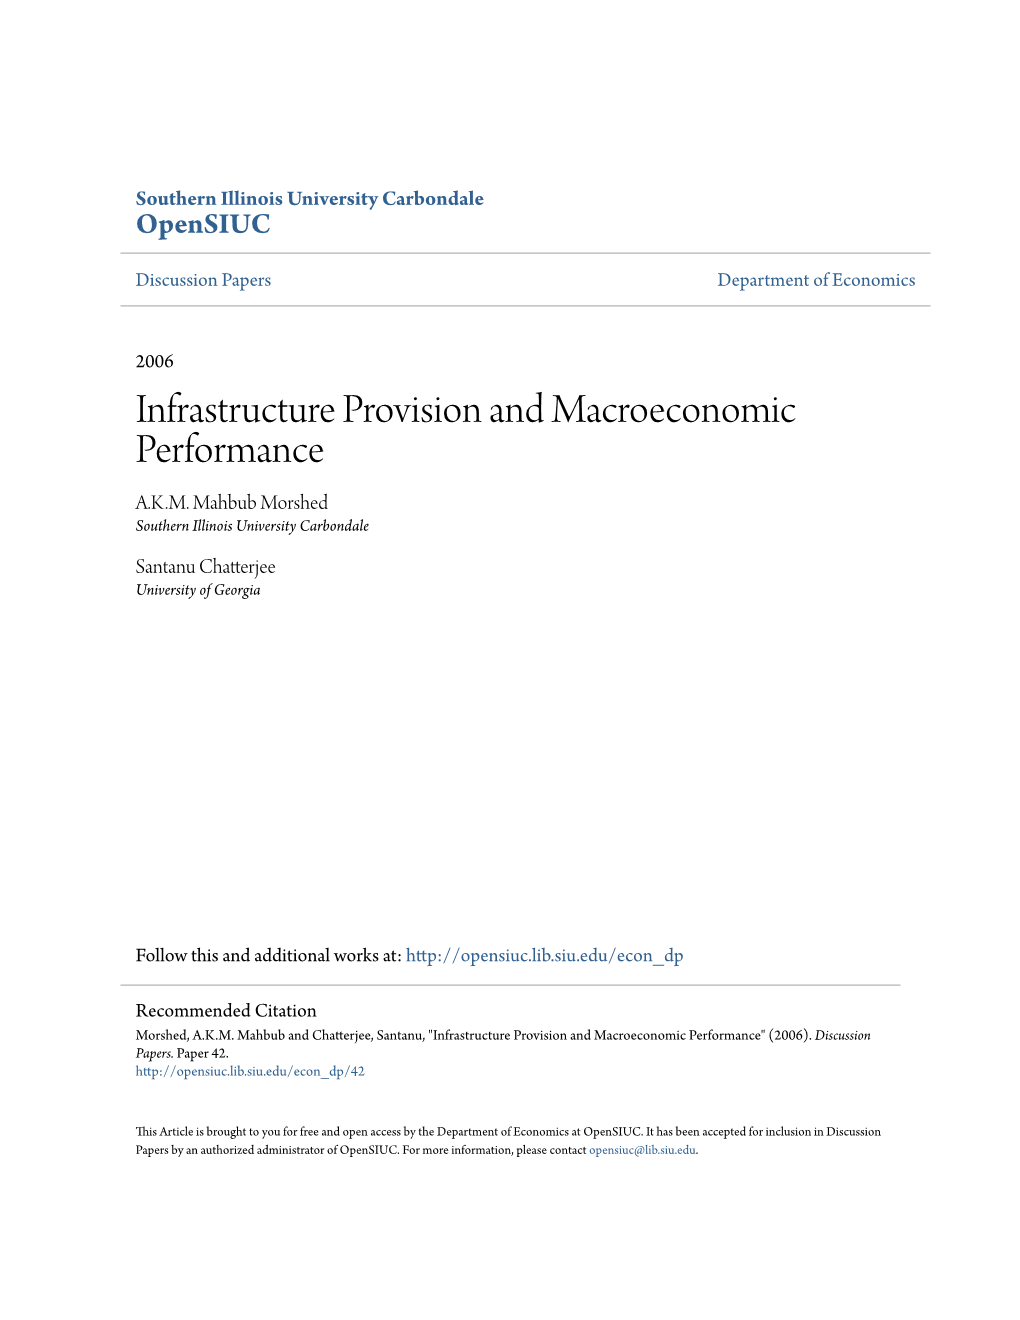 Infrastructure Provision and Macroeconomic Performance A.K.M